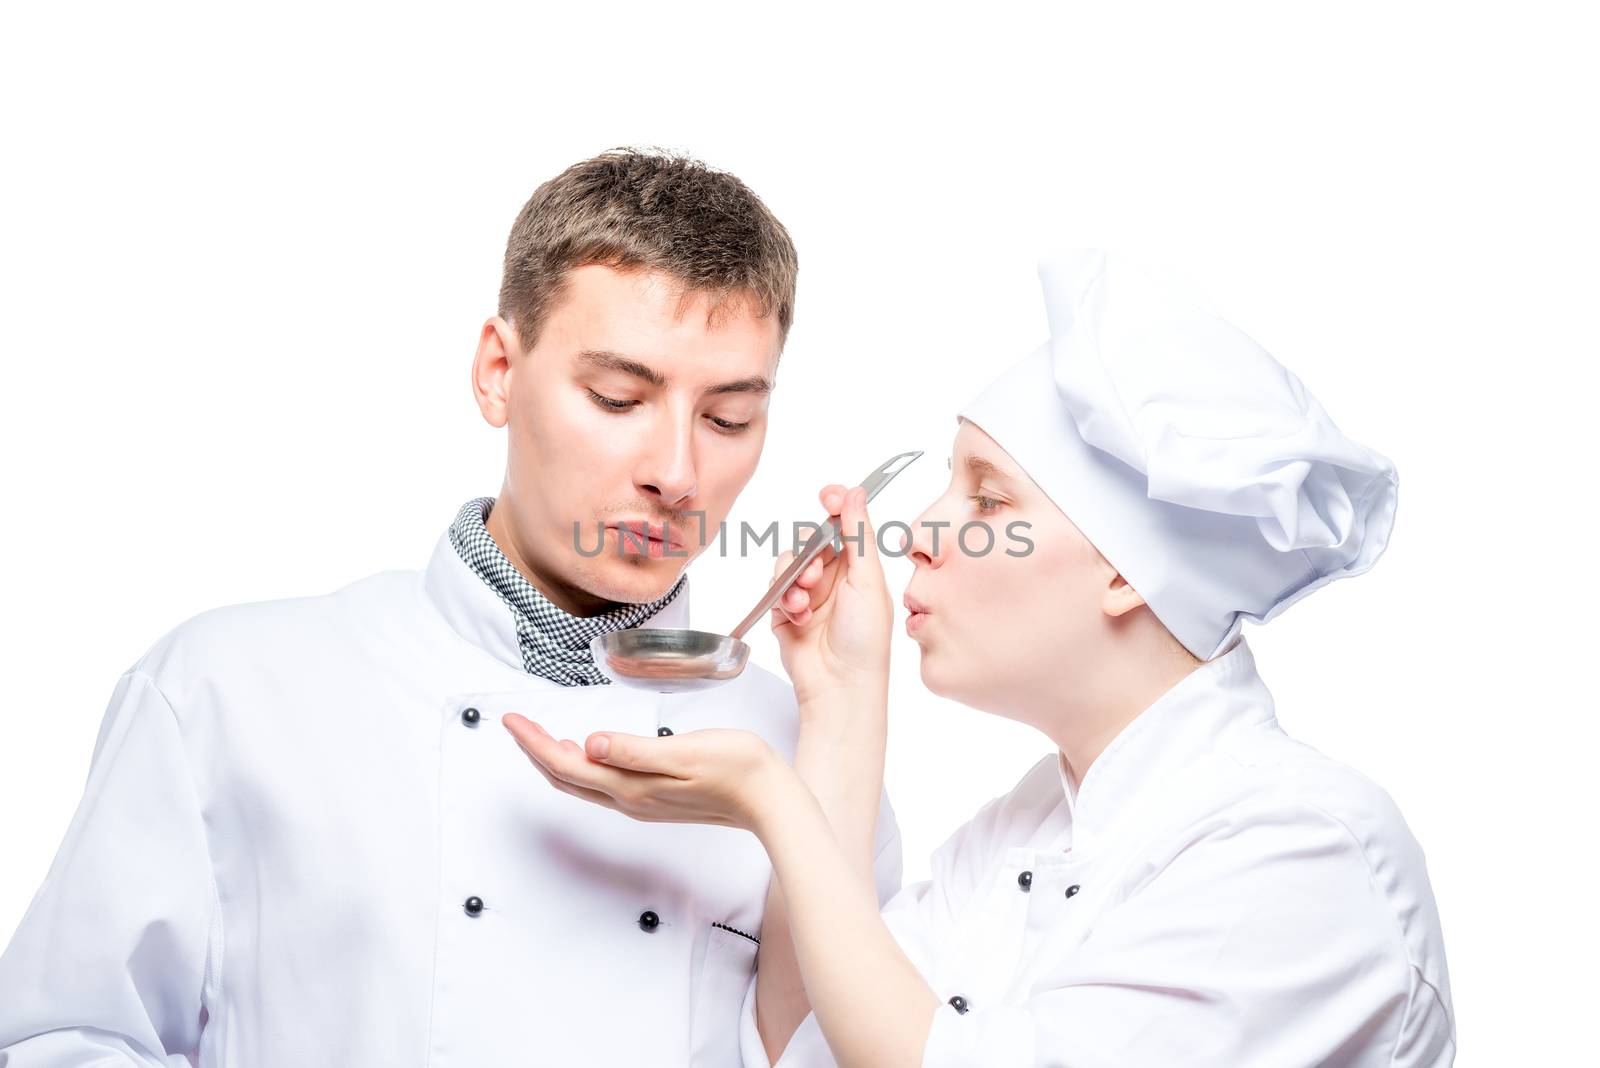 professional chefs try soup from a ladle on a white background by kosmsos111